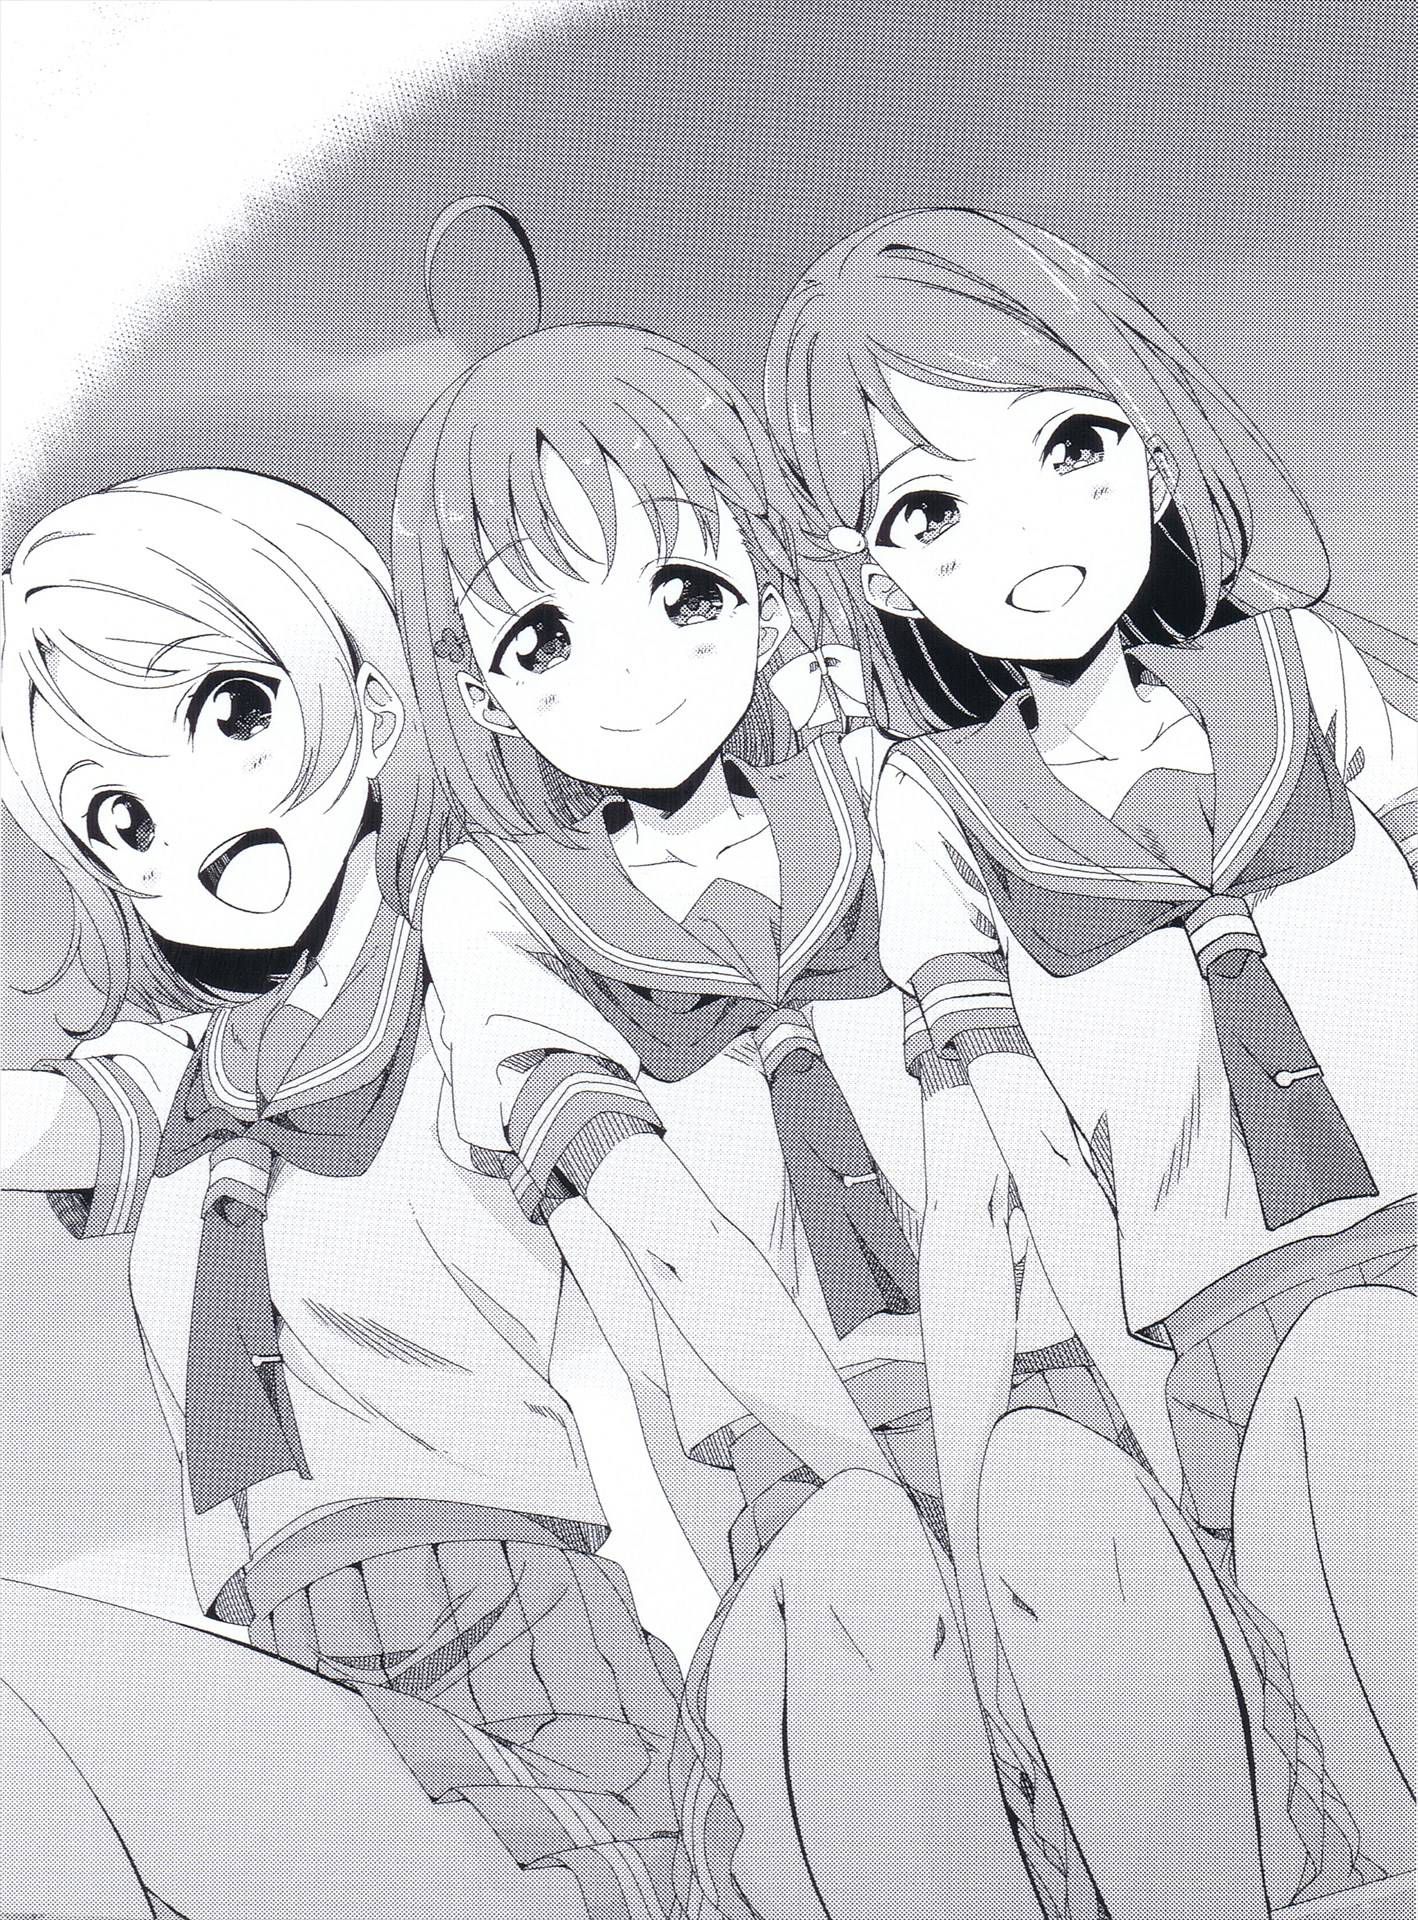 [Image is: "love live! Sunshine ' with everyone's favorite anime wwwwwwwww 11